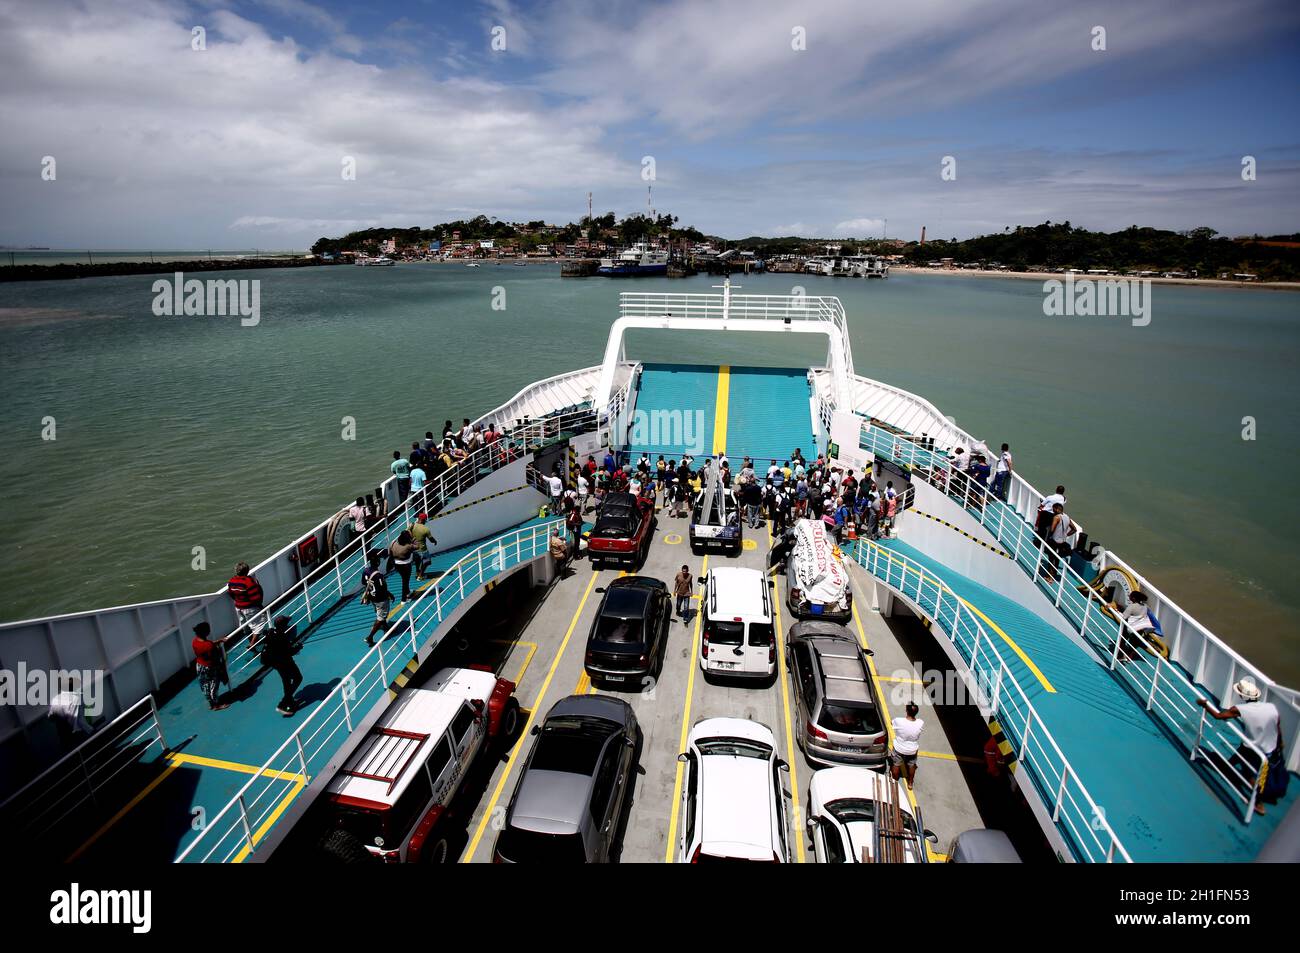 itaparica, bahia / brazil - september 5, 2017: Passengers and vehicles disembarking from the Dorival Caimmy ferry boat at the Bom Despacho terminal af Stock Photo